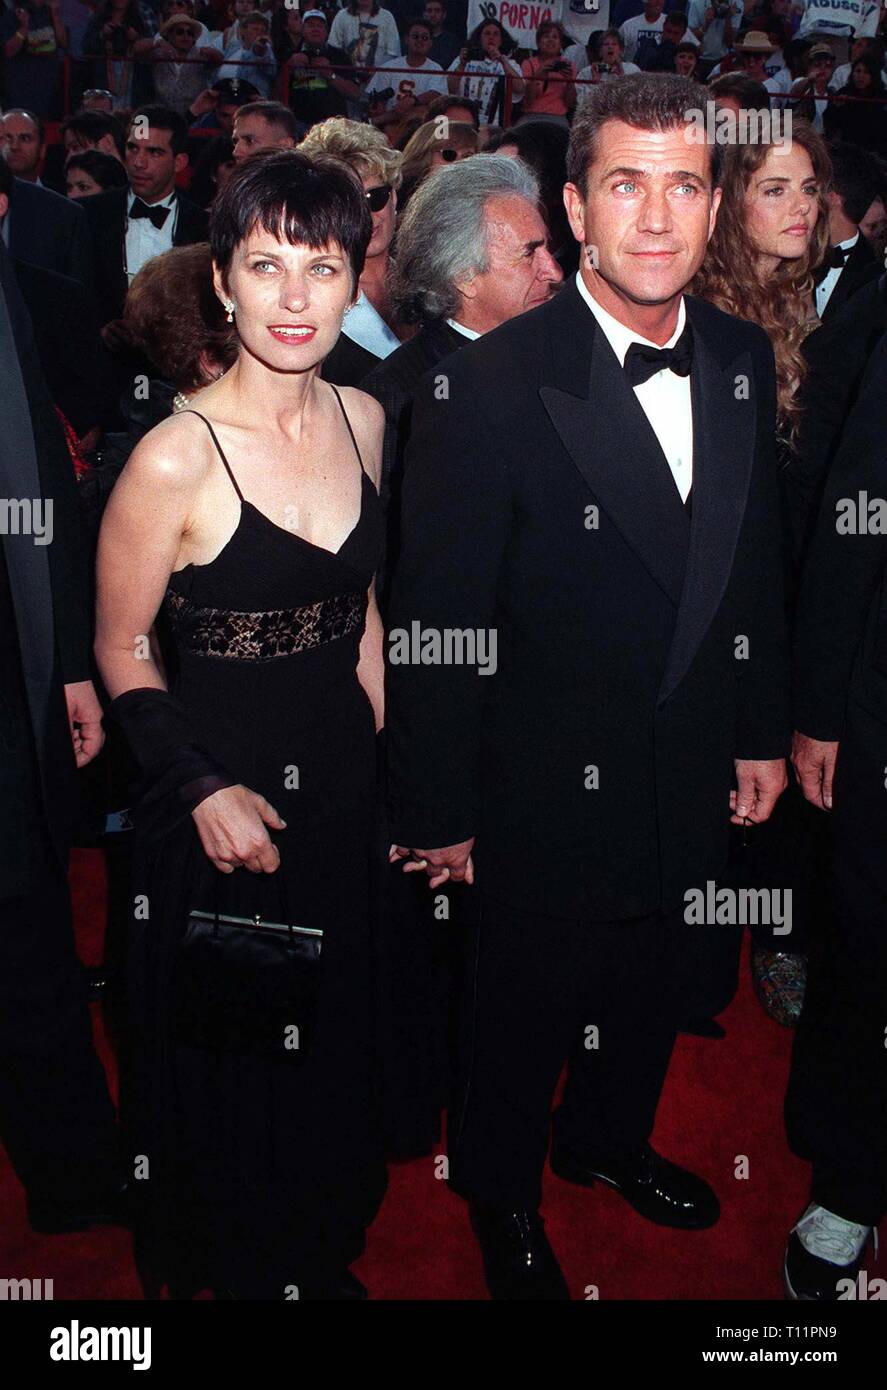 LOS ANGELES, CA. March 25, 1997: Mel Gibson & wife Robyn Gibson at the Academy Awards. Pix: Paul Smith Stock Photo